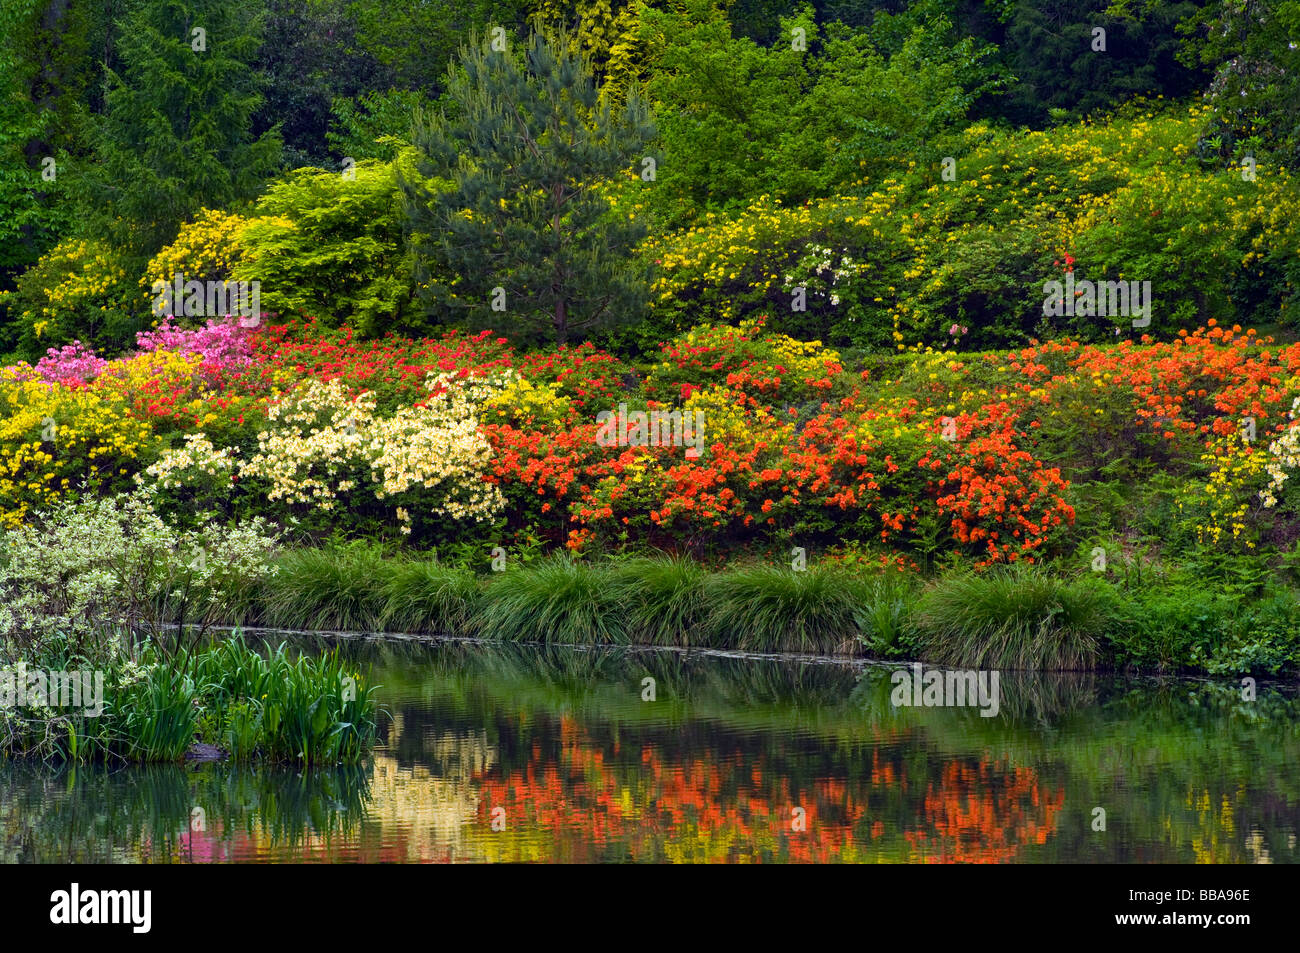 East Bank Of  Engine Pond at Leonardslee Gardens West Sussex England with Various Colours Azalea Shrubs Reflected In The Water Stock Photo